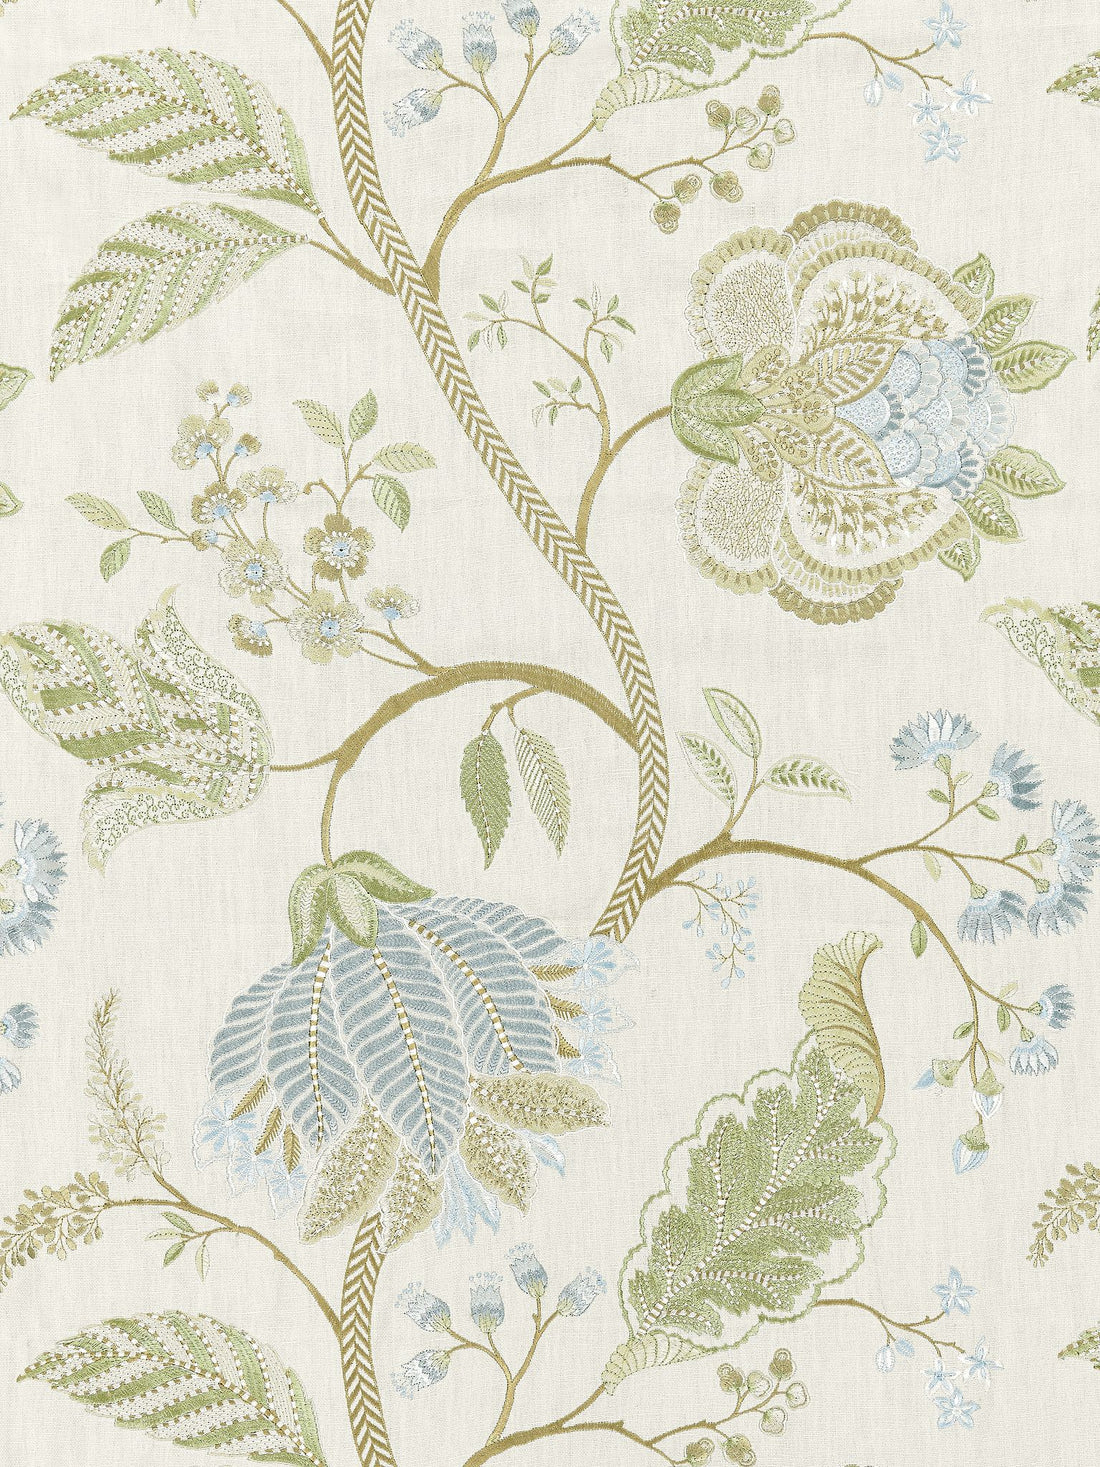 Palampore Embroidery fabric in summer sage color - pattern number SC 000127175 - by Scalamandre in the Scalamandre Fabrics Book 1 collection